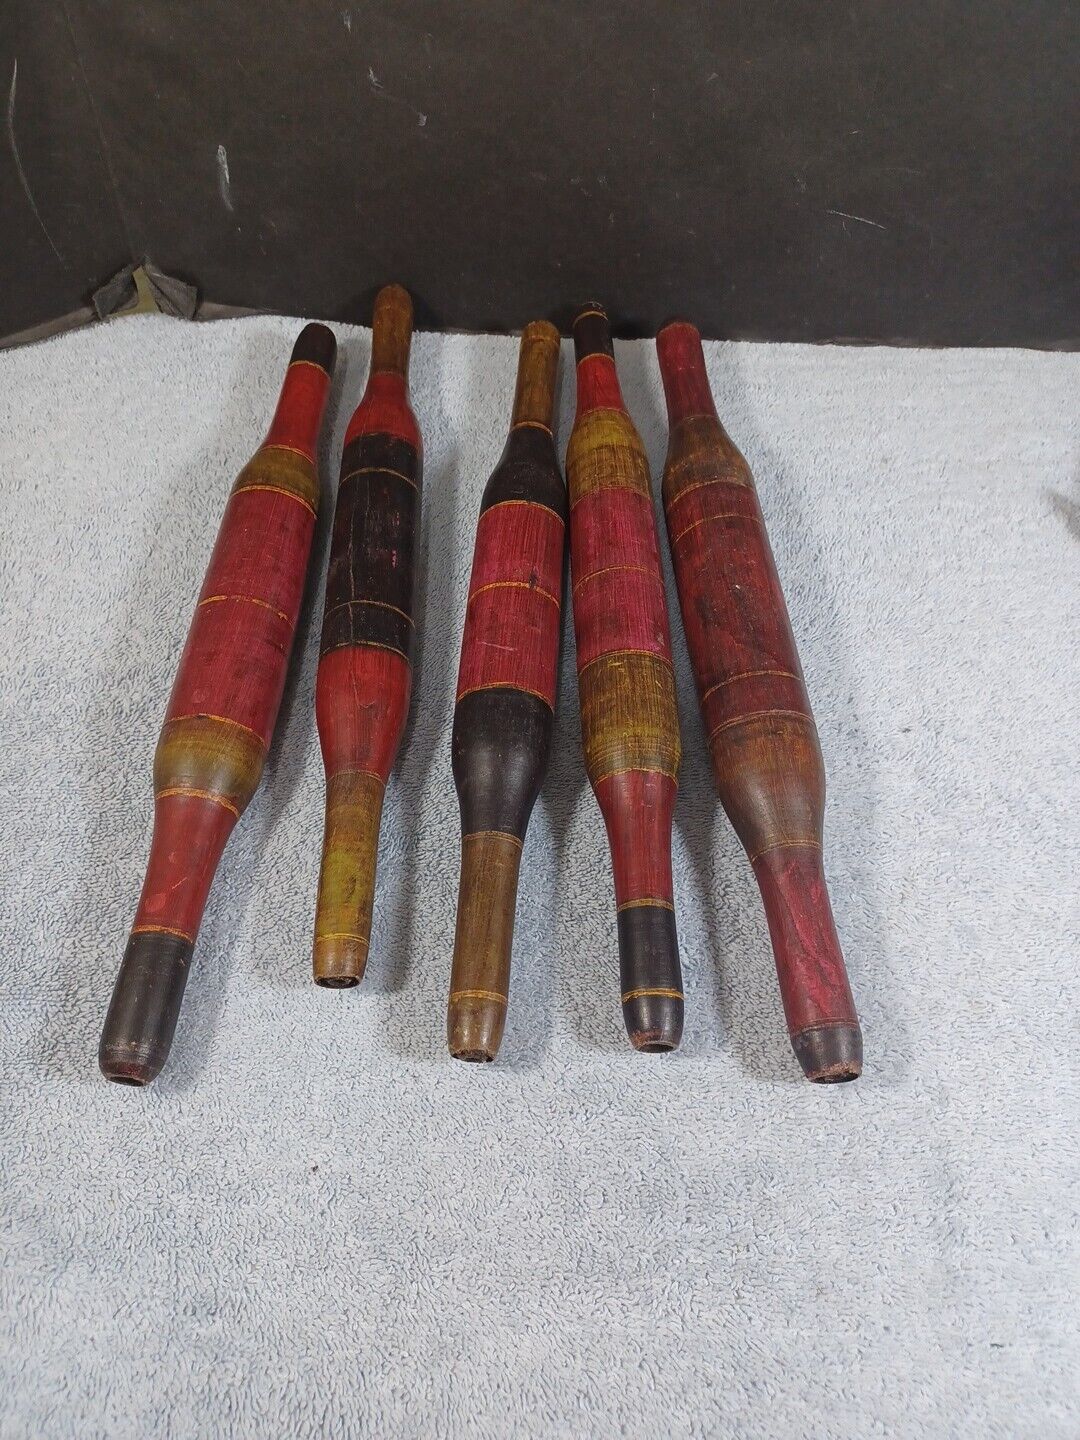 Lot of 5 Vintahe Wooden Chapati Bread Rolling Pins 